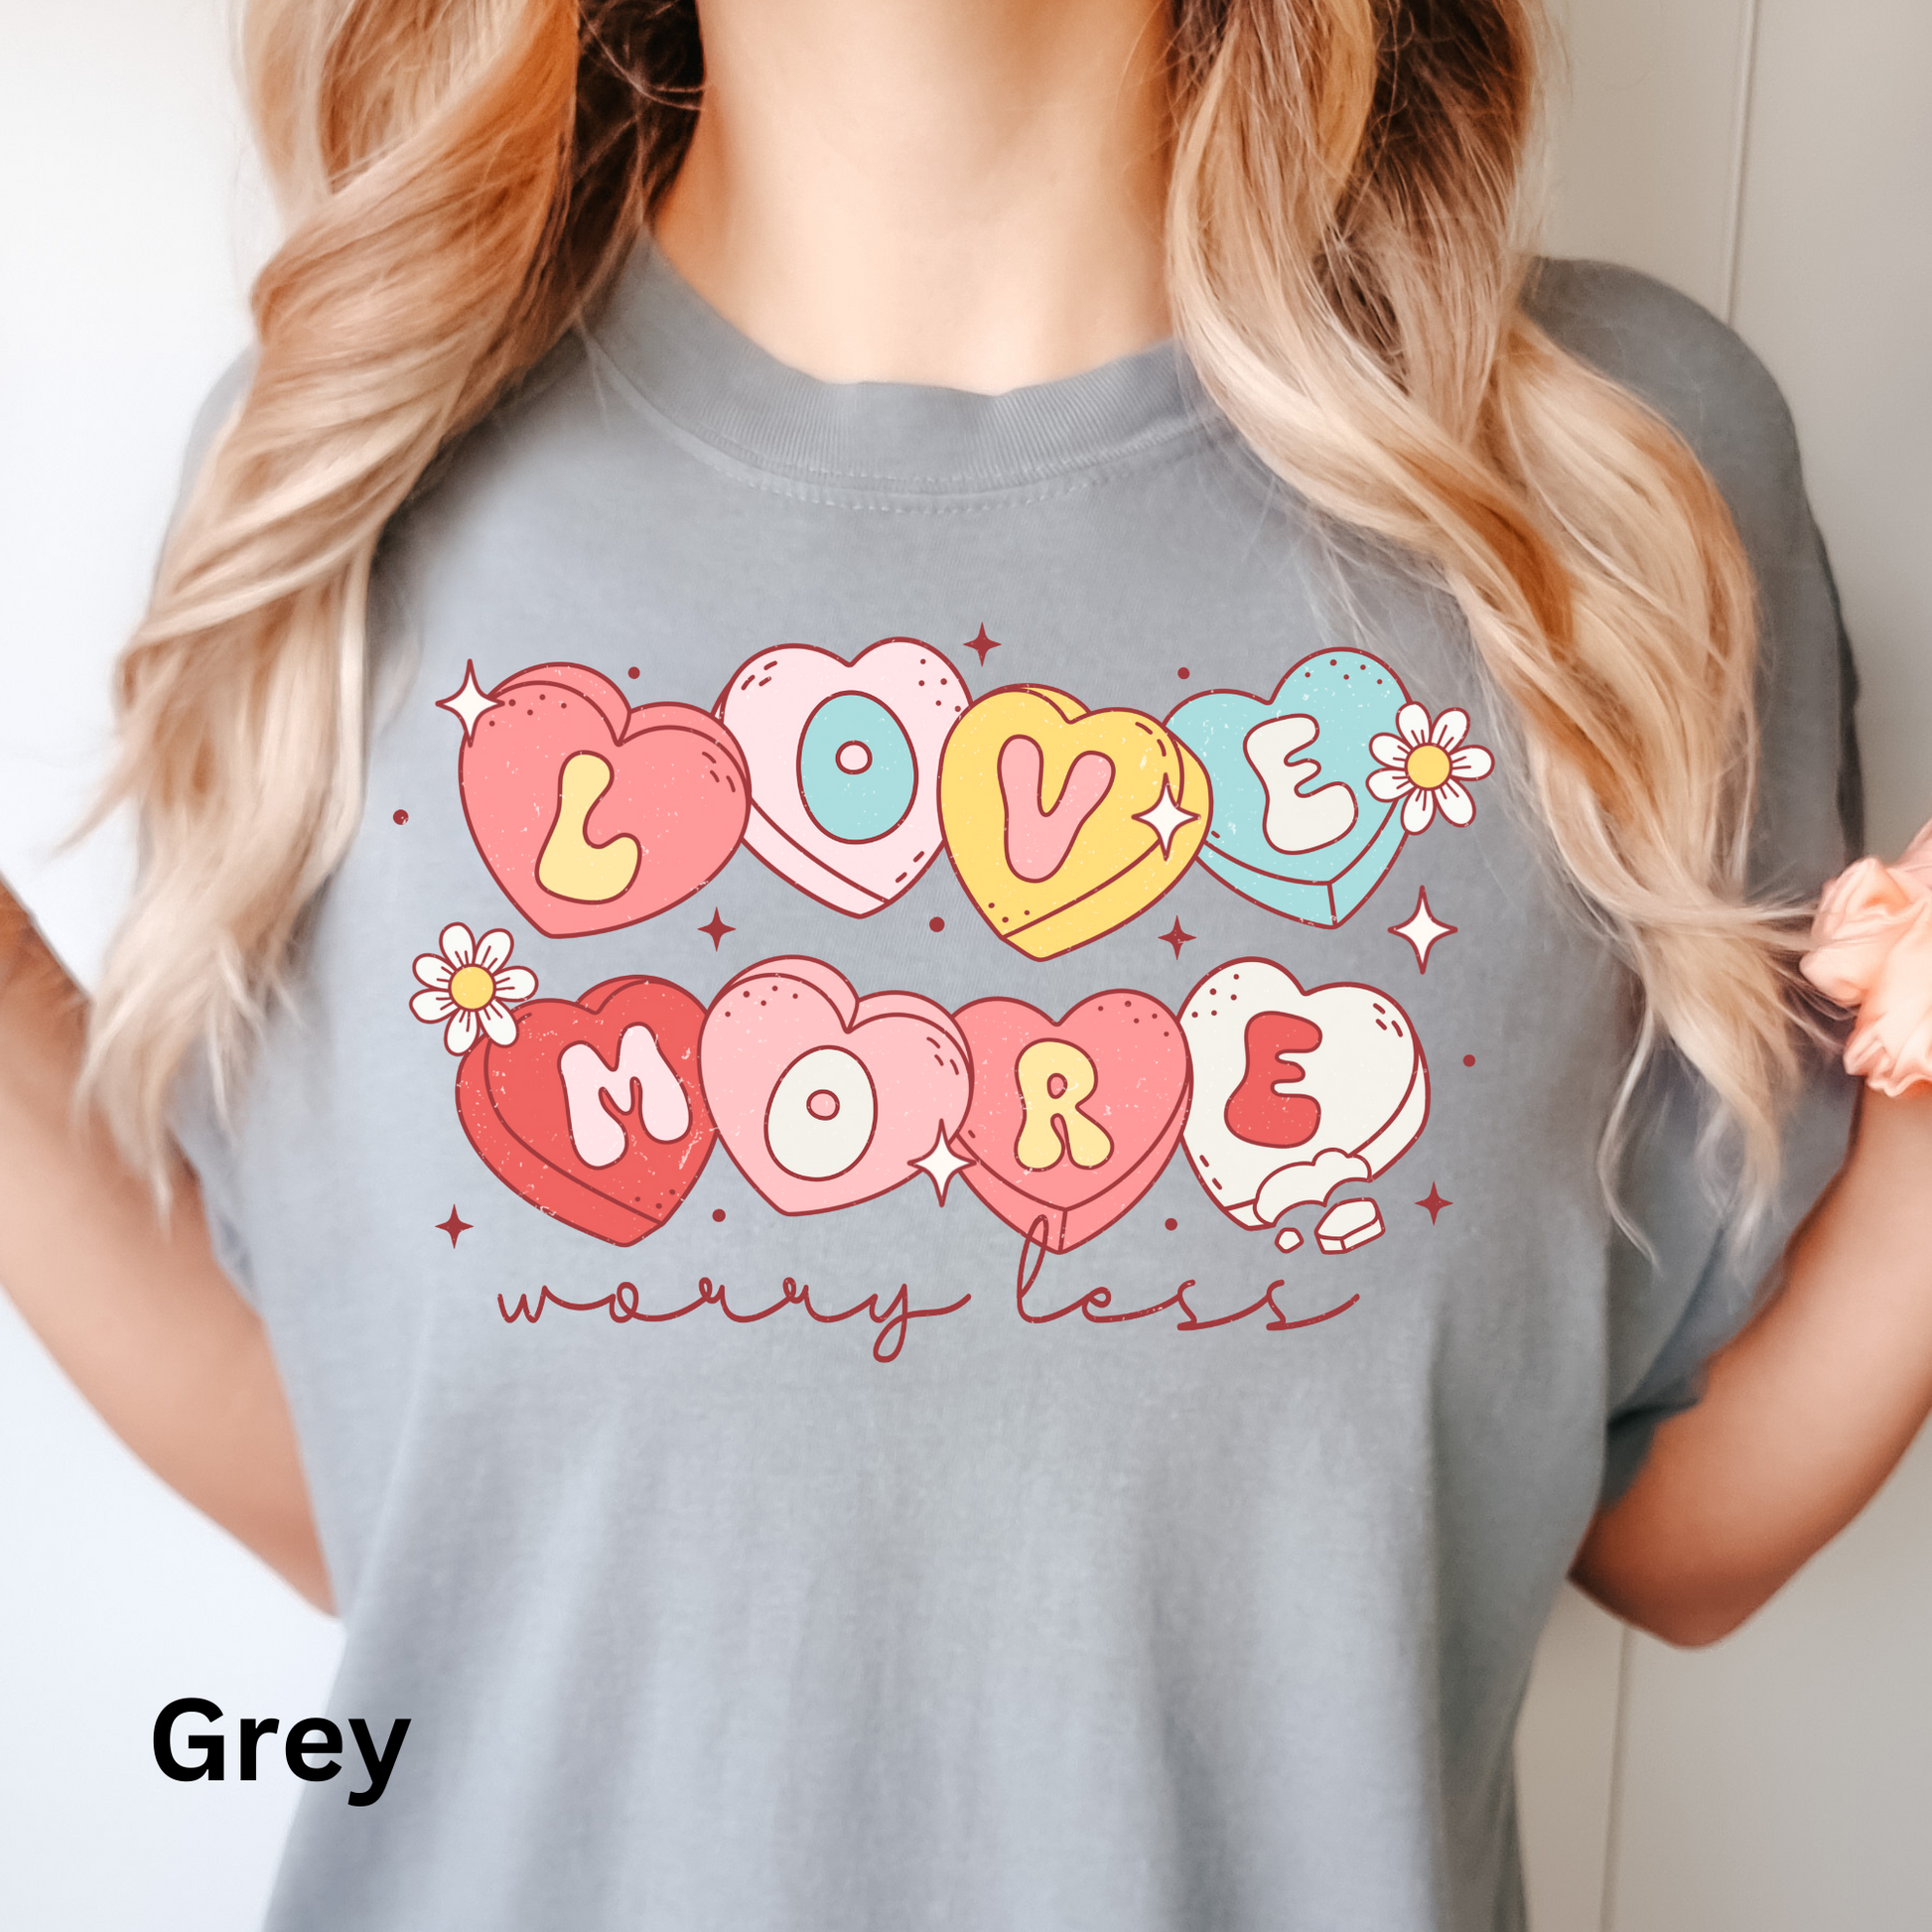 a woman wearing a grey shirt that says love more